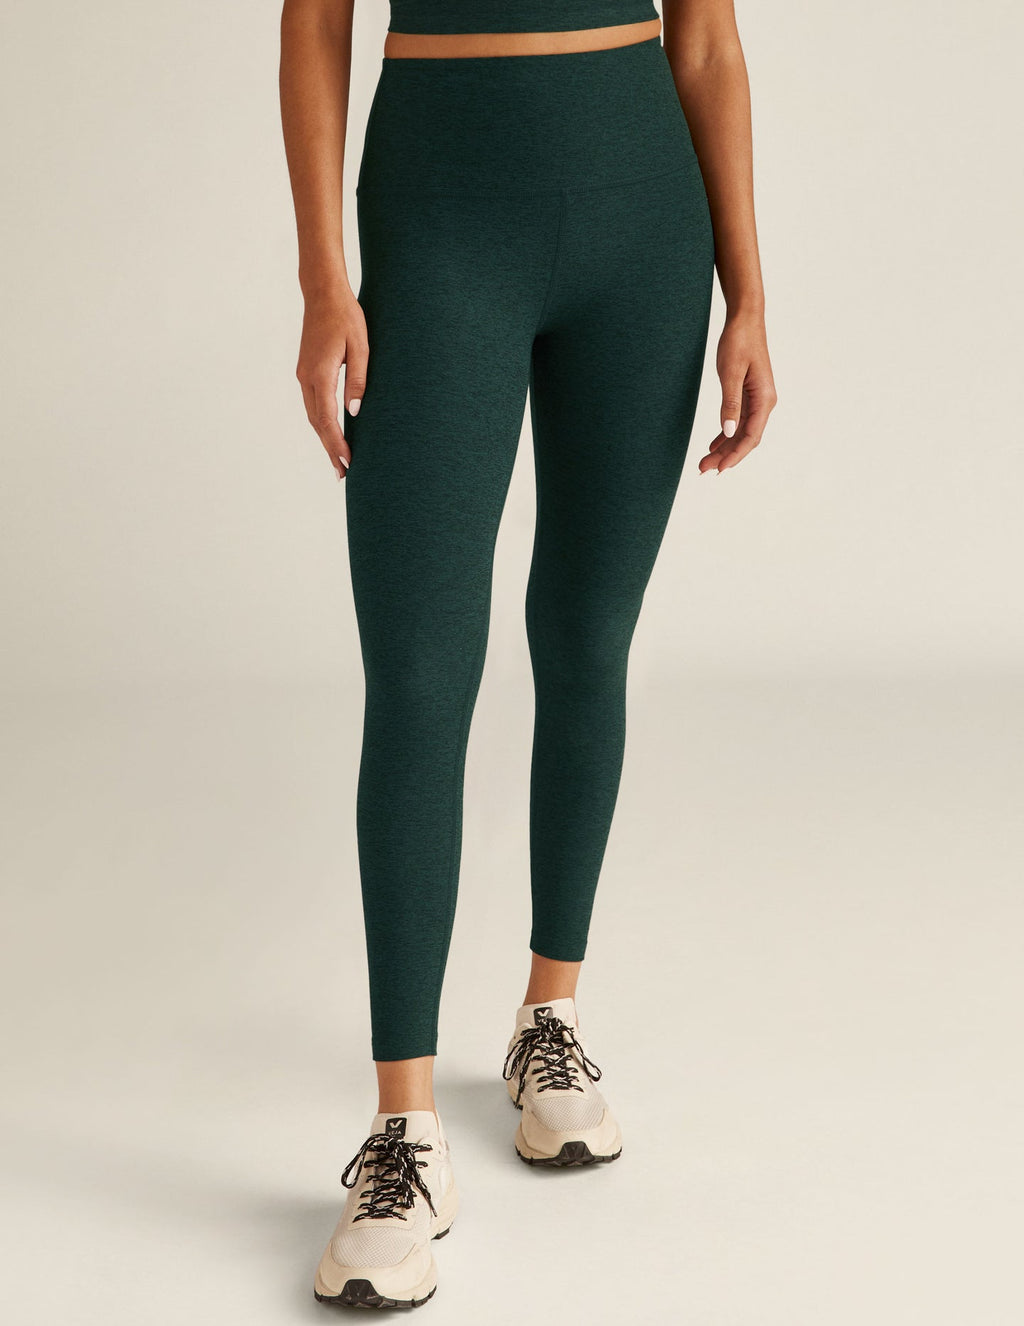 BEYOND YOGA AT YOUR LEISURE HIGH WAIST MIDI LEGGING - CARMEL TOFFEE HE –  Work It Out